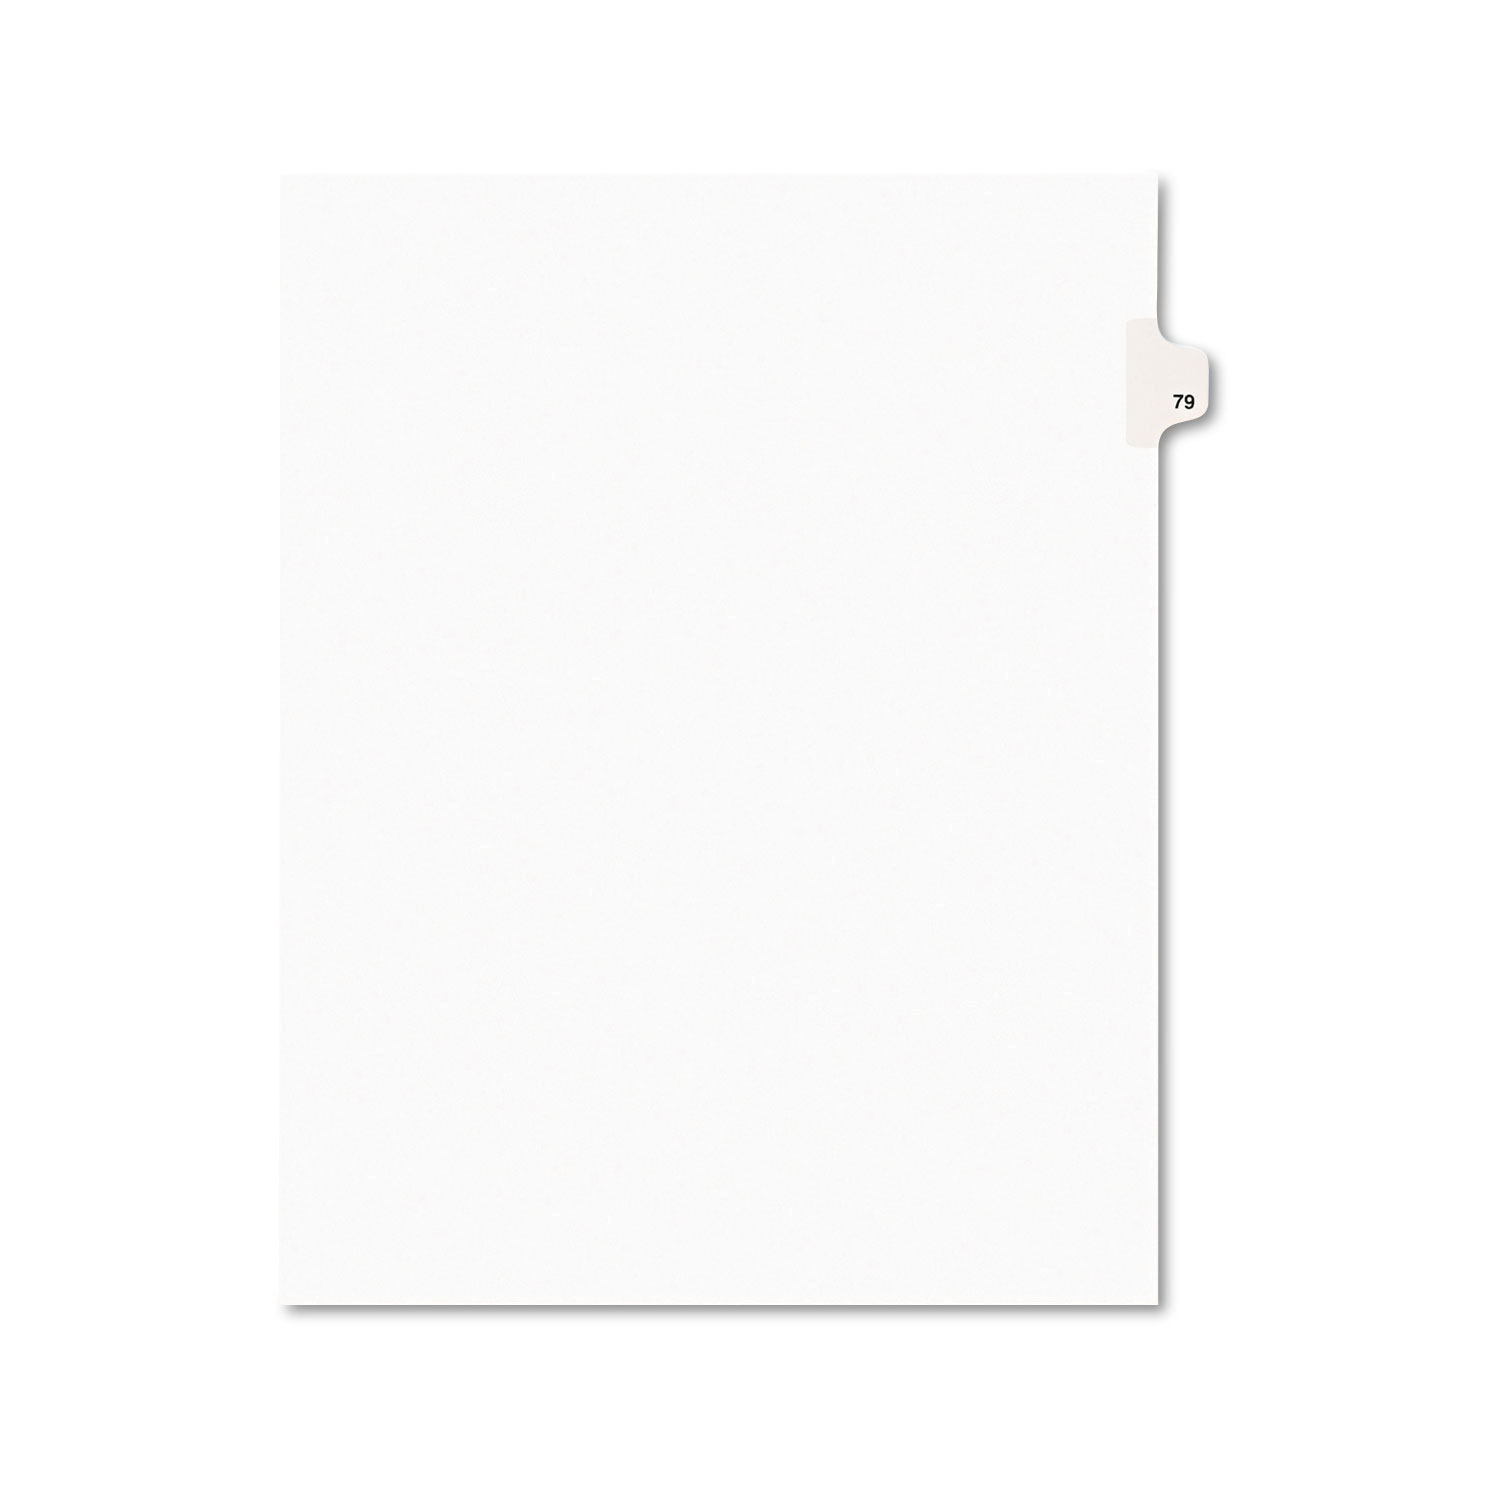  Avery 01079 Preprinted Legal Exhibit Side Tab Index Dividers, Avery Style, 10-Tab, 79, 11 x 8.5, White, 25/Pack (AVE01079) 